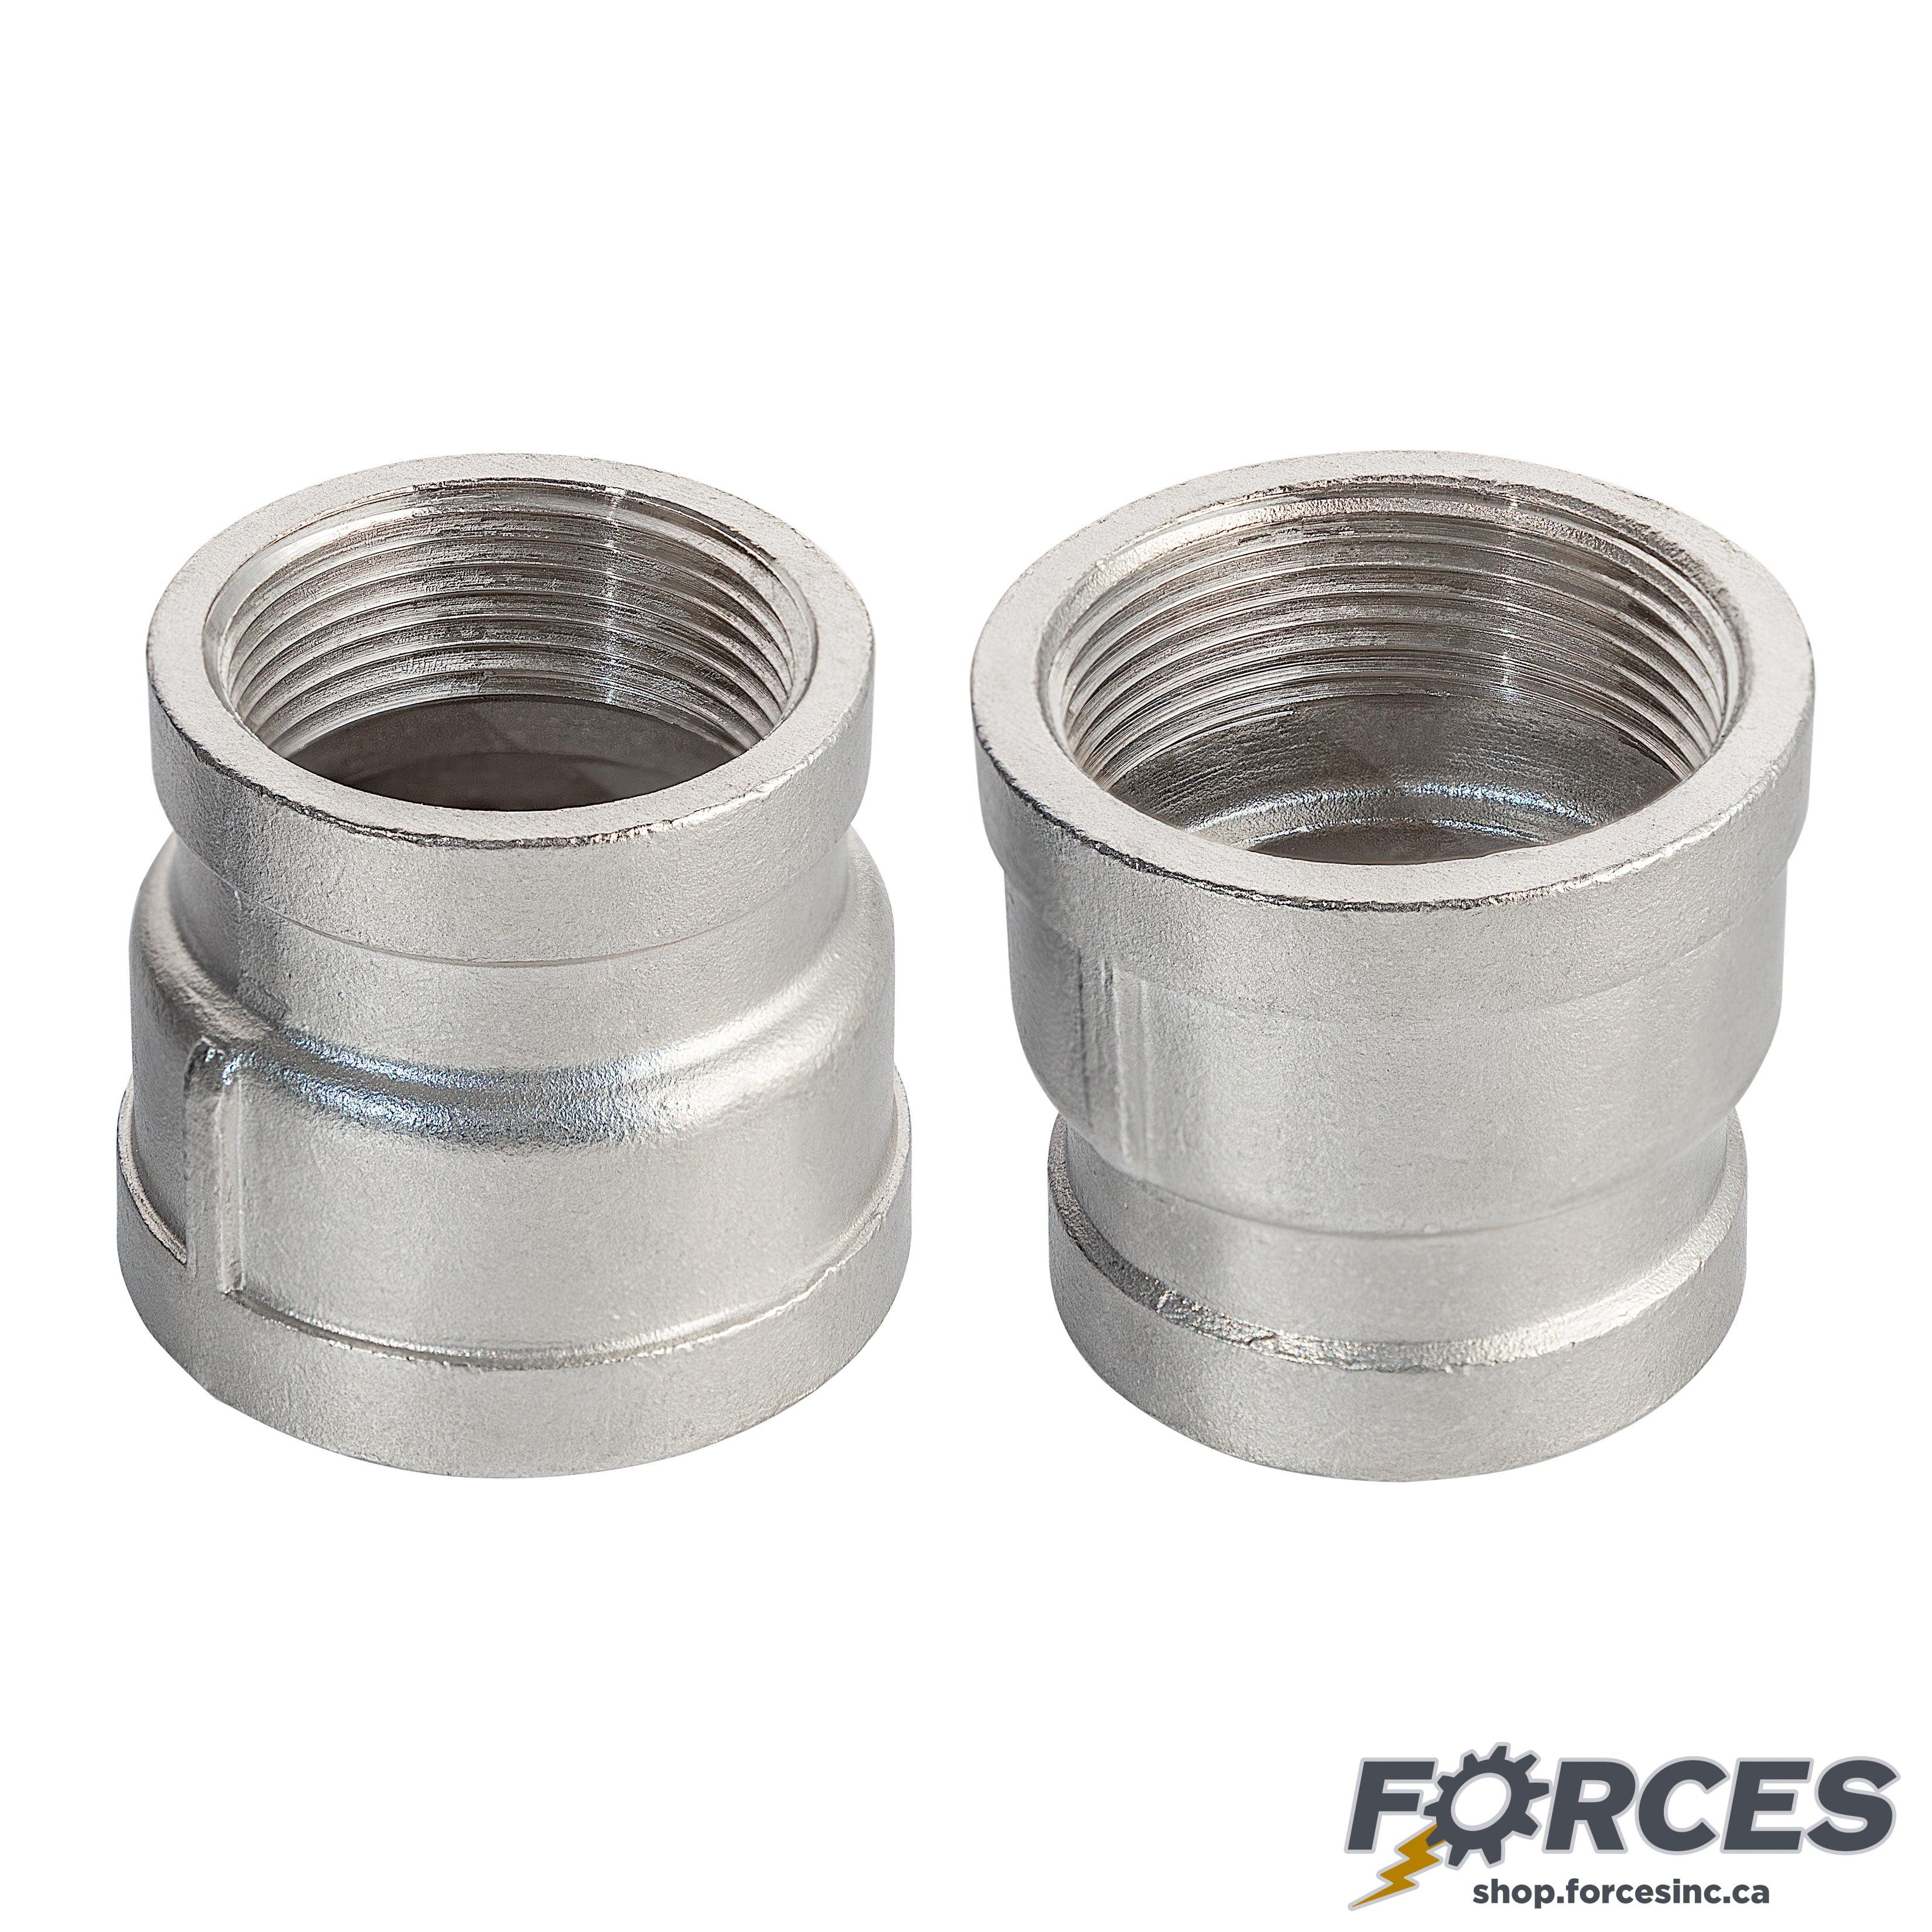 1-1/4" x 1" Coupling Reducer NPT #150 - Stainless Steel 316 - Forces Inc